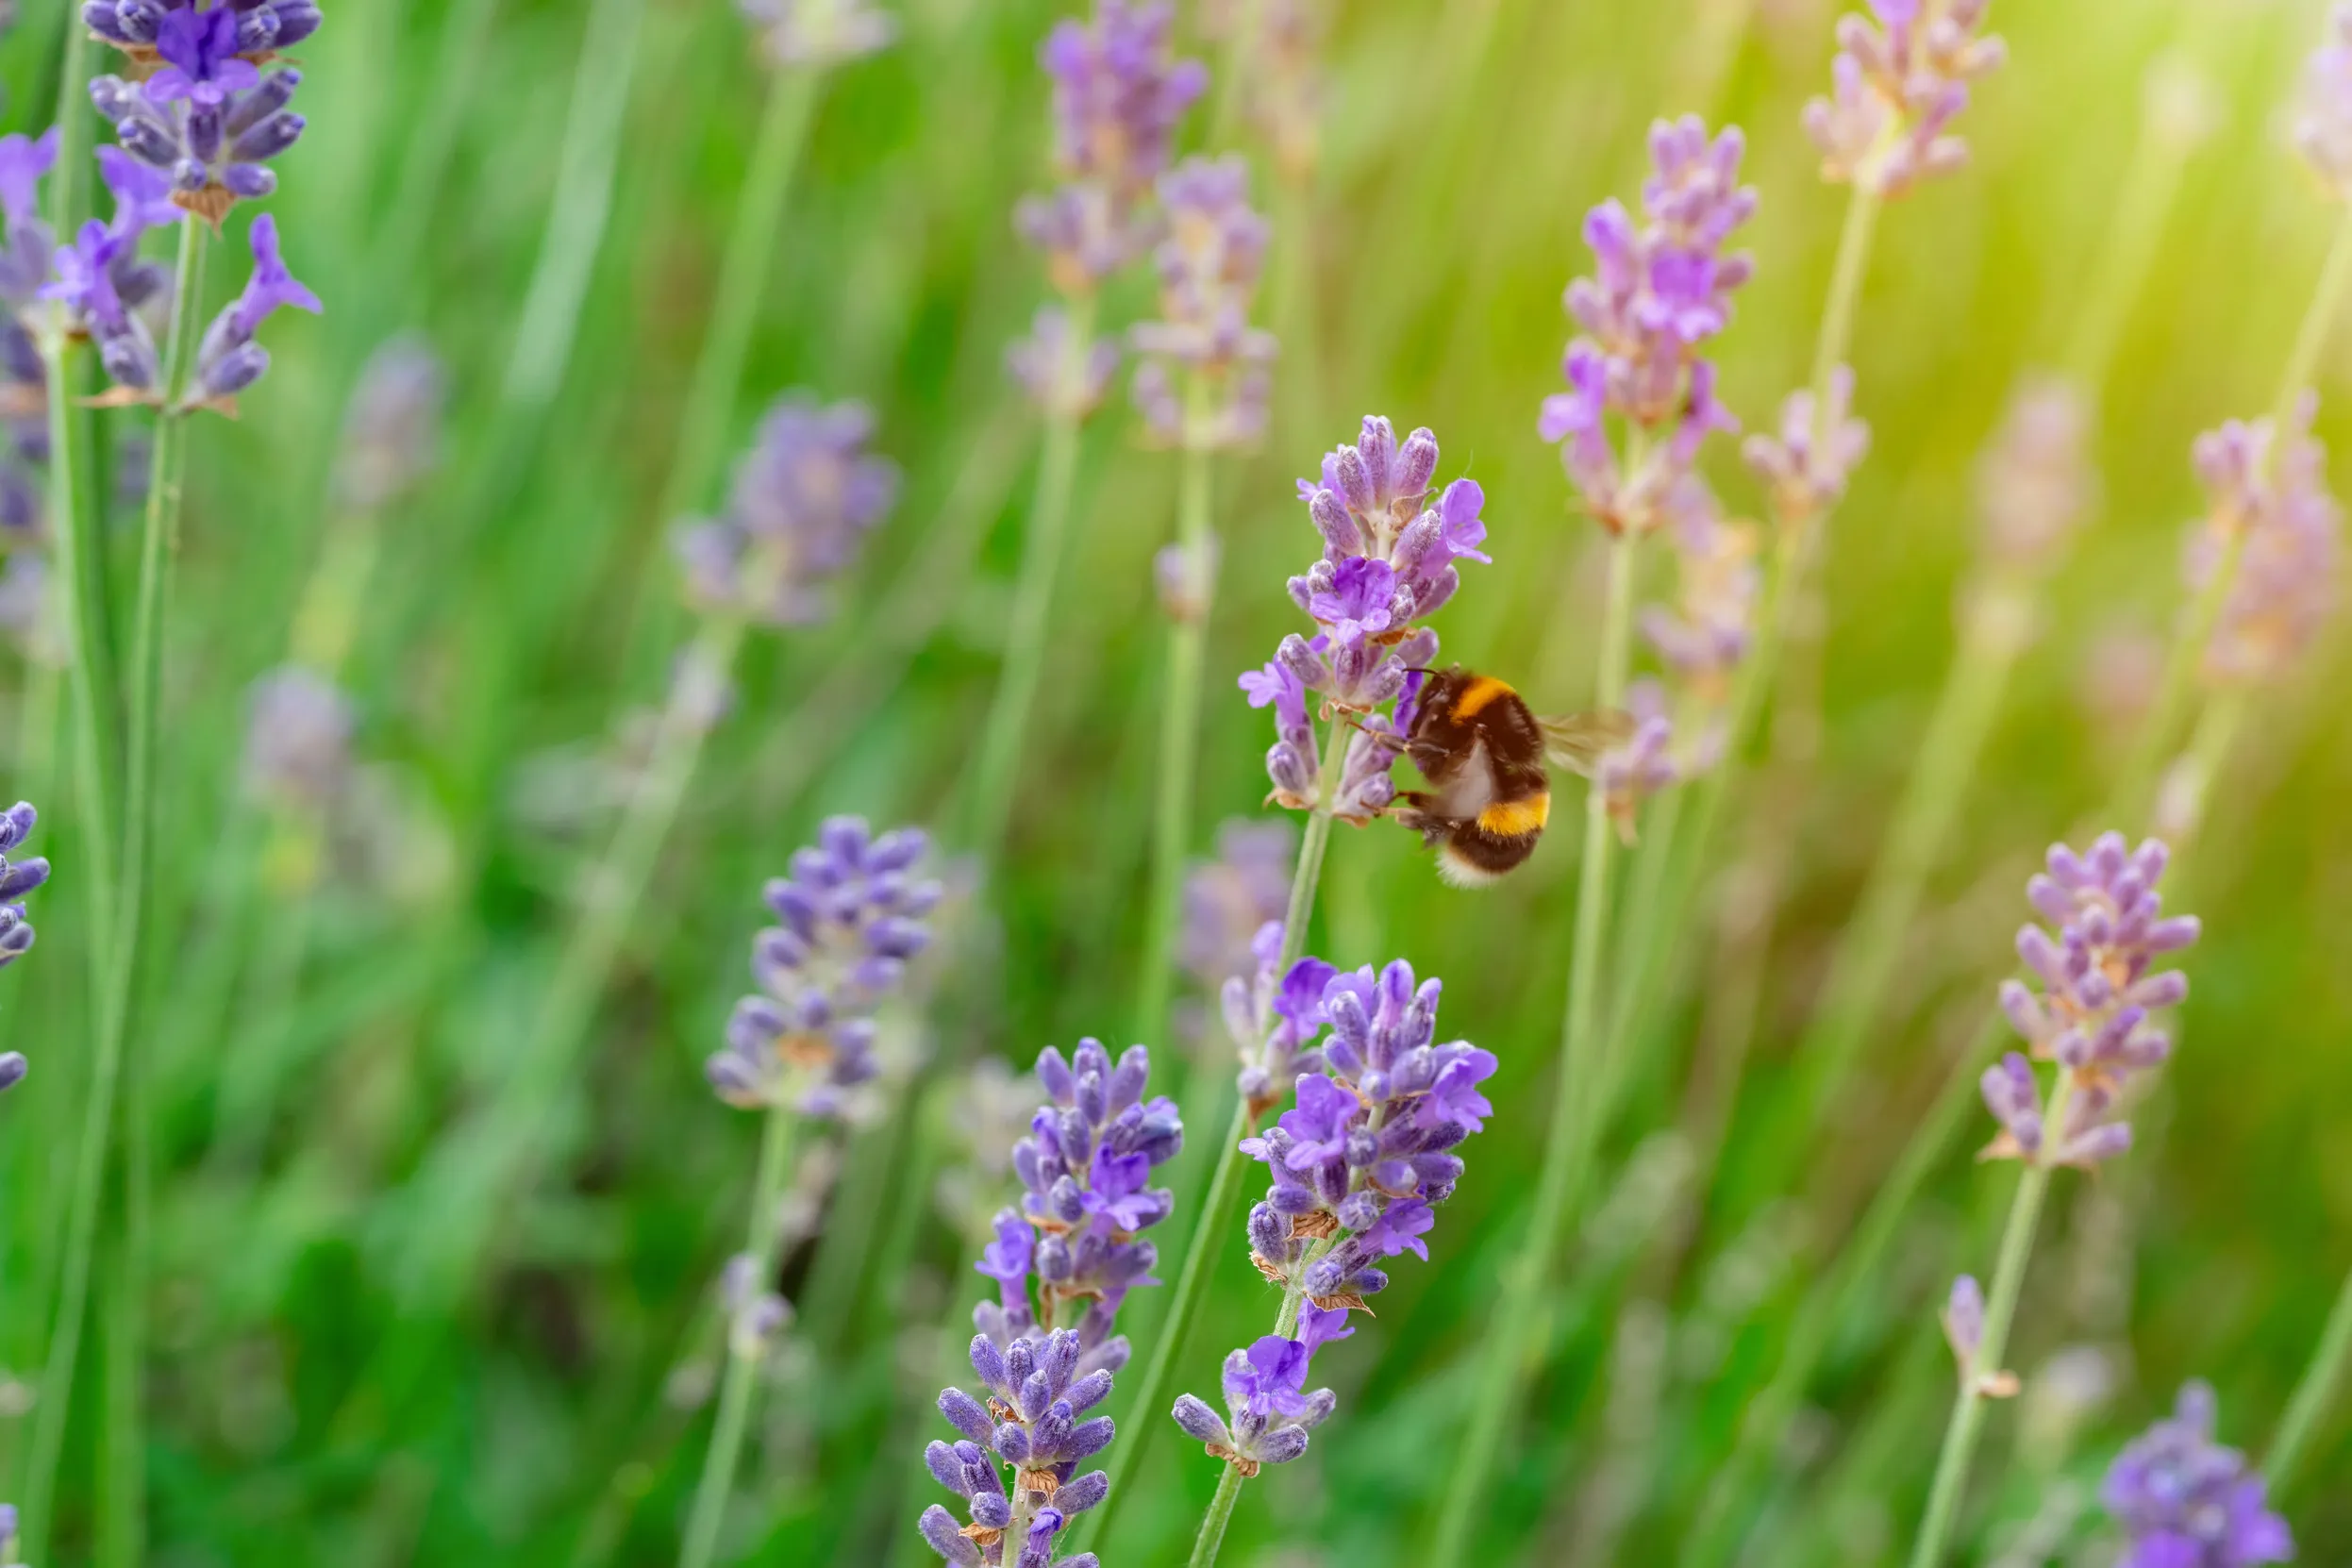 A lone Bumblebee perched on lavender in a field.